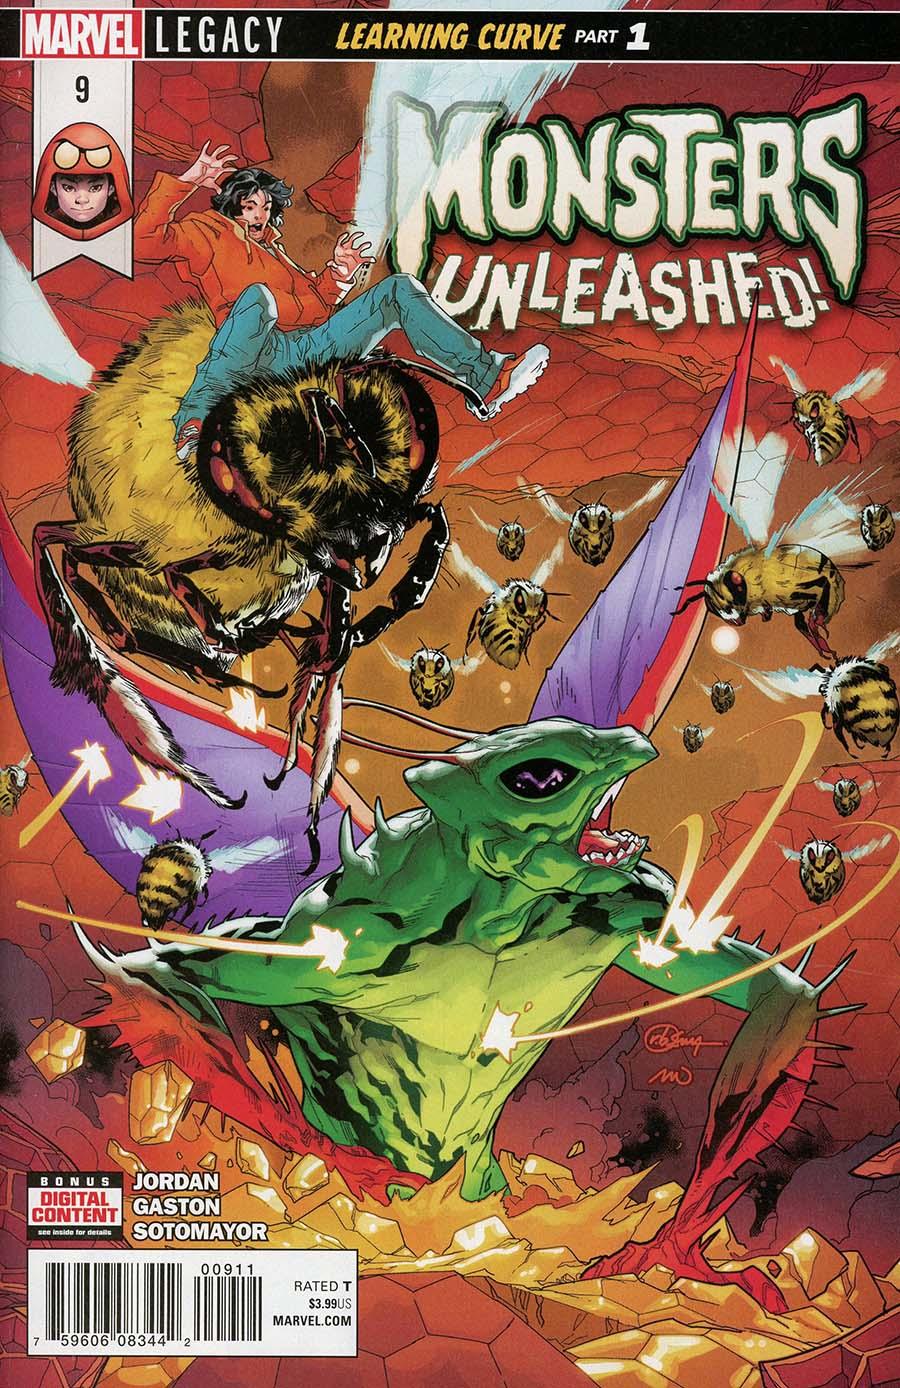 Monsters Unleashed Vol. 2 #9